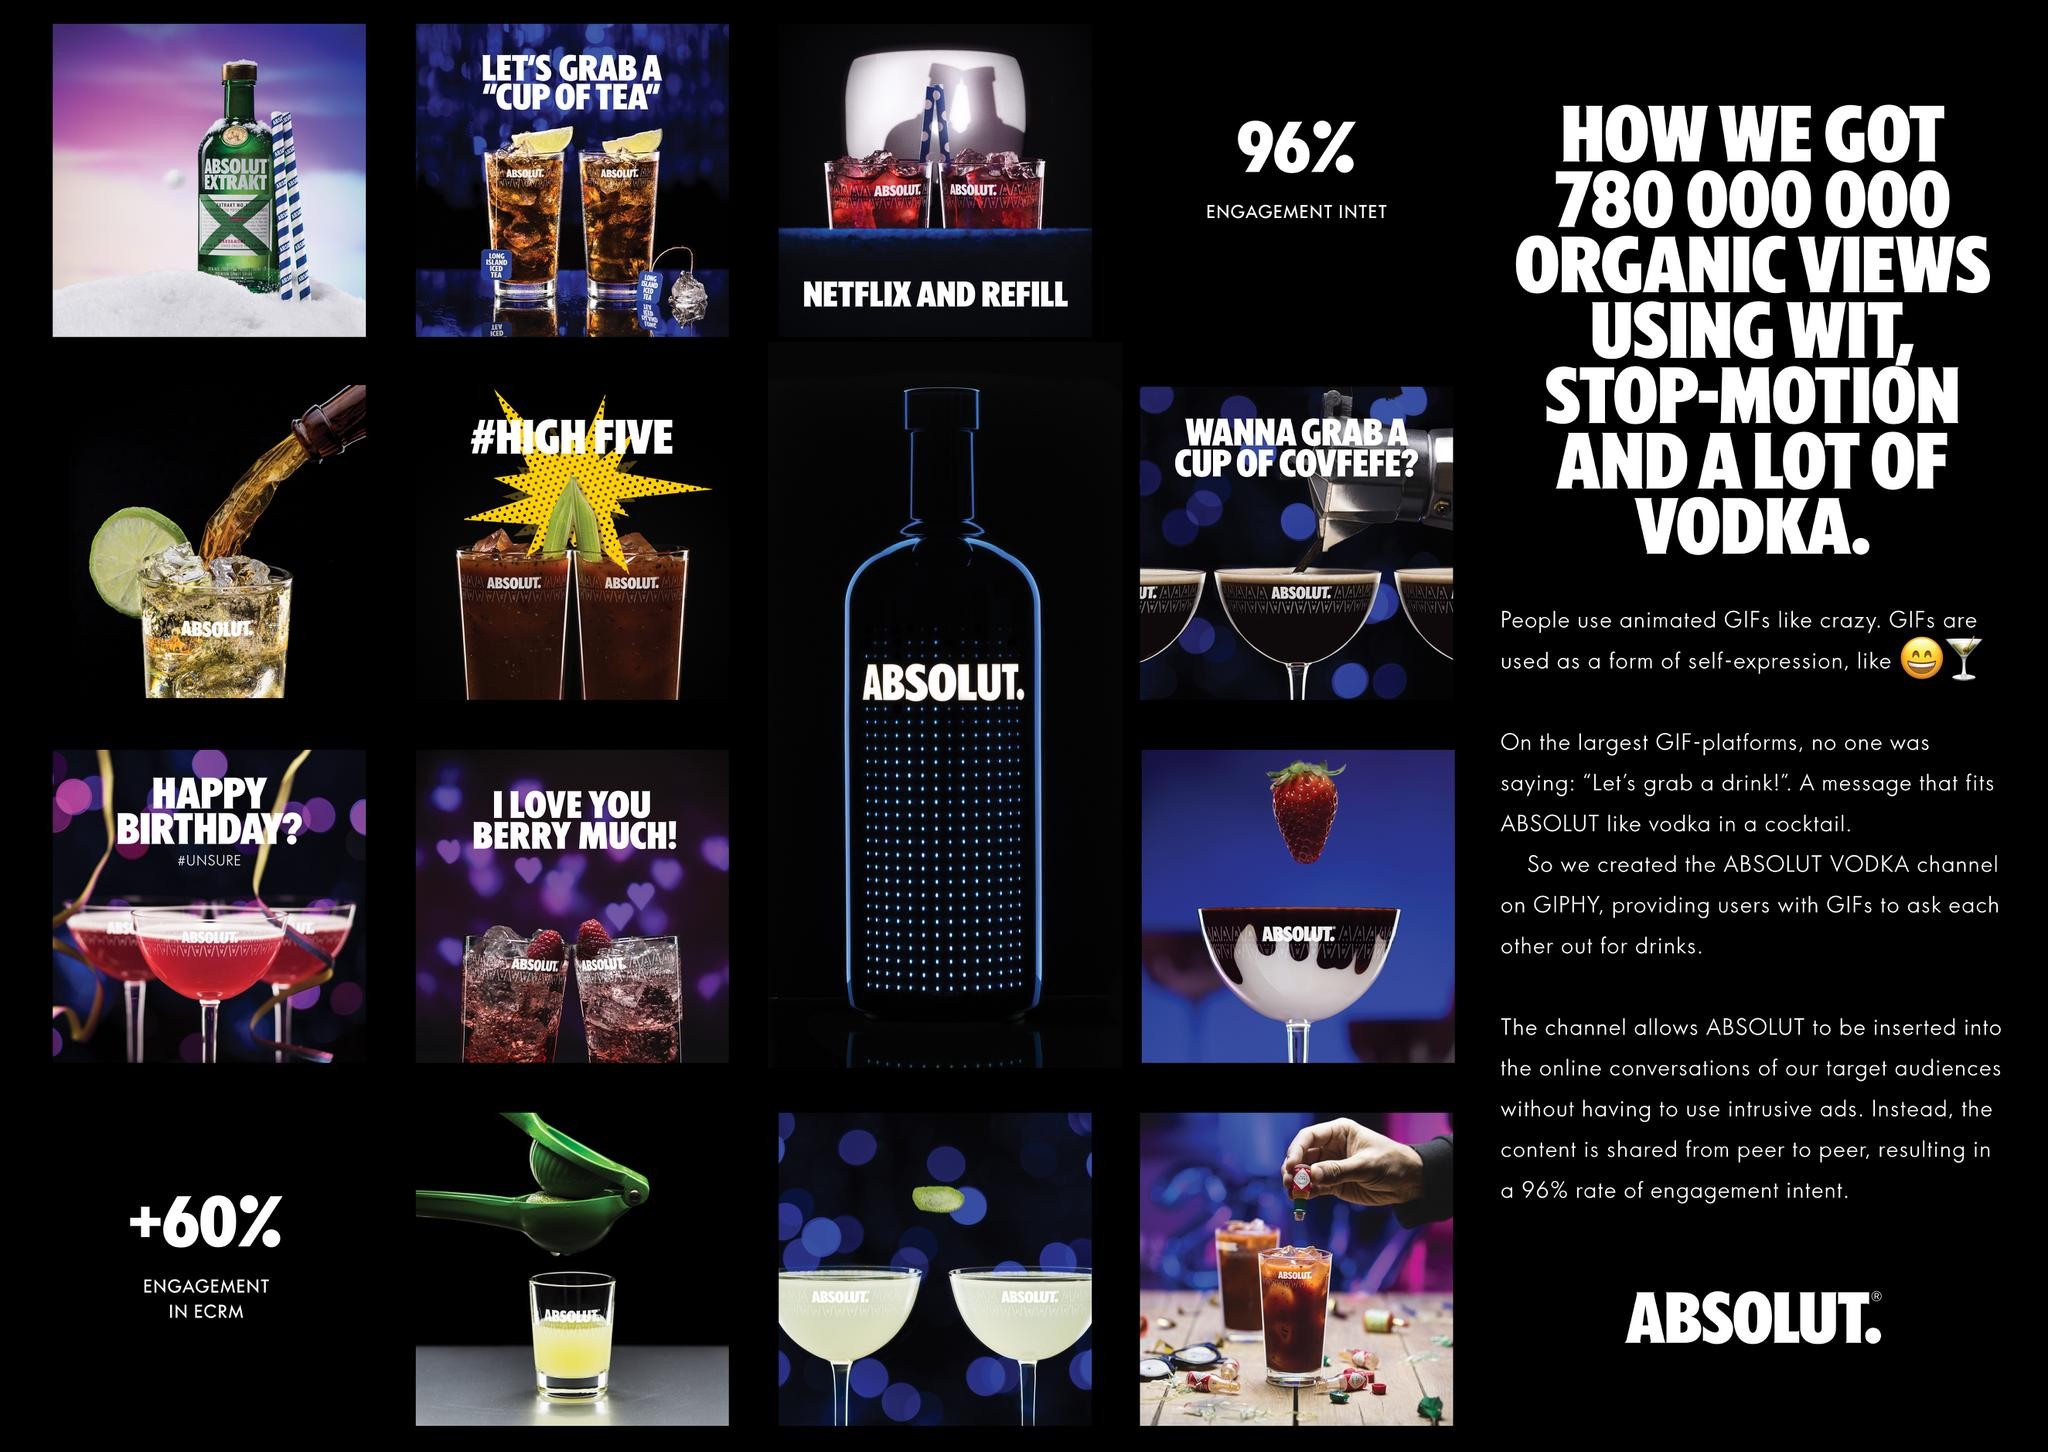 ABSOLUT VODKA - NEVER GONNA GIF YOU UP